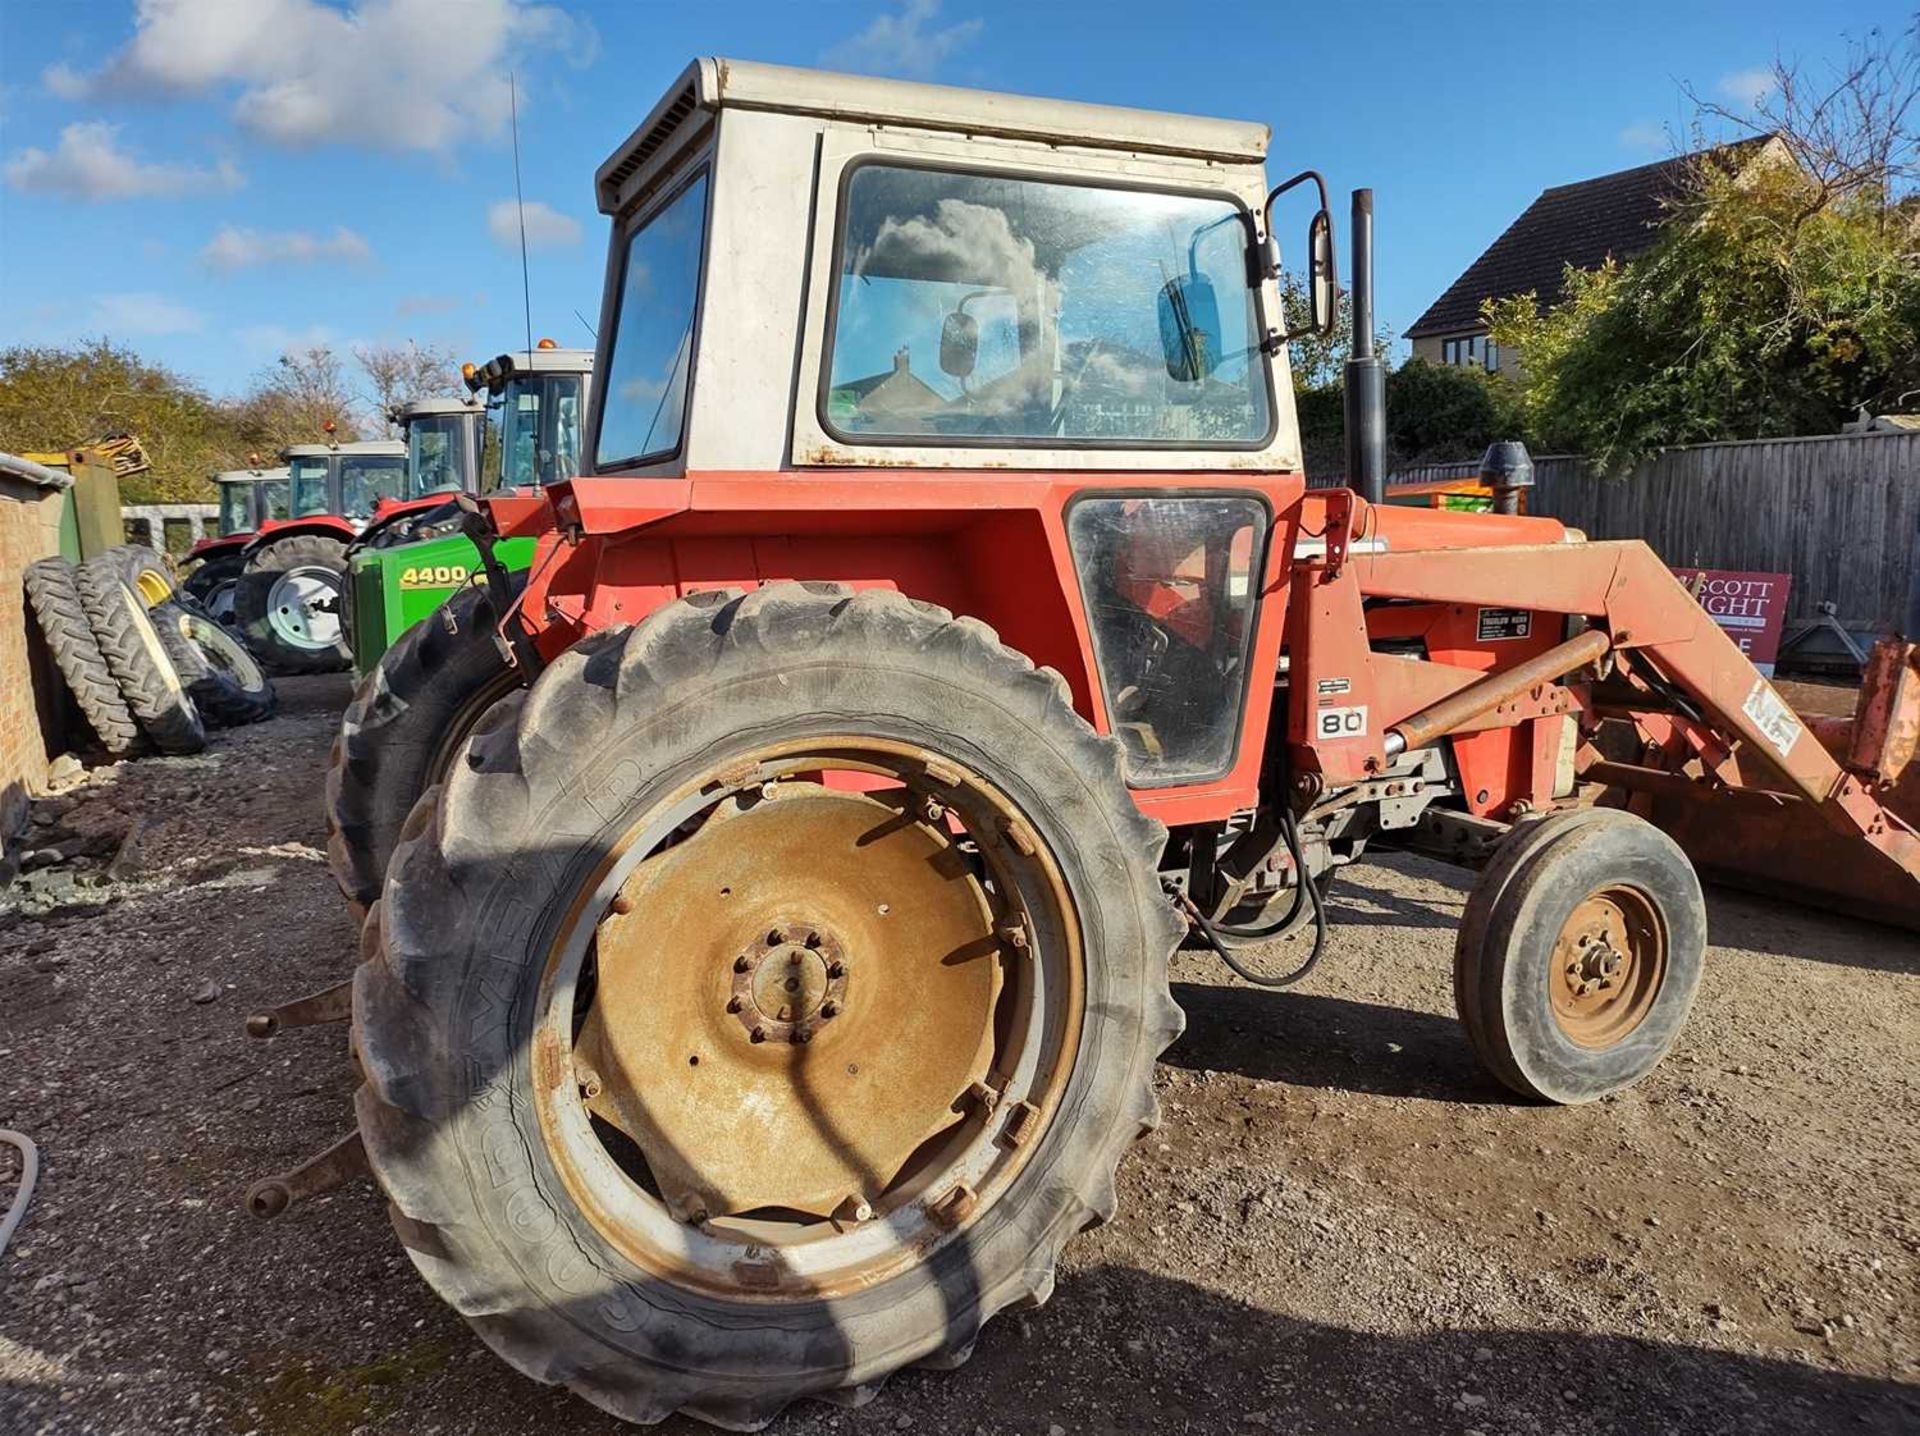 Massey Ferguson 590 Tractor with MF 80 Front Loader & Attachments. 5,573 Hrs. Reg: XVA 740T - Image 6 of 11